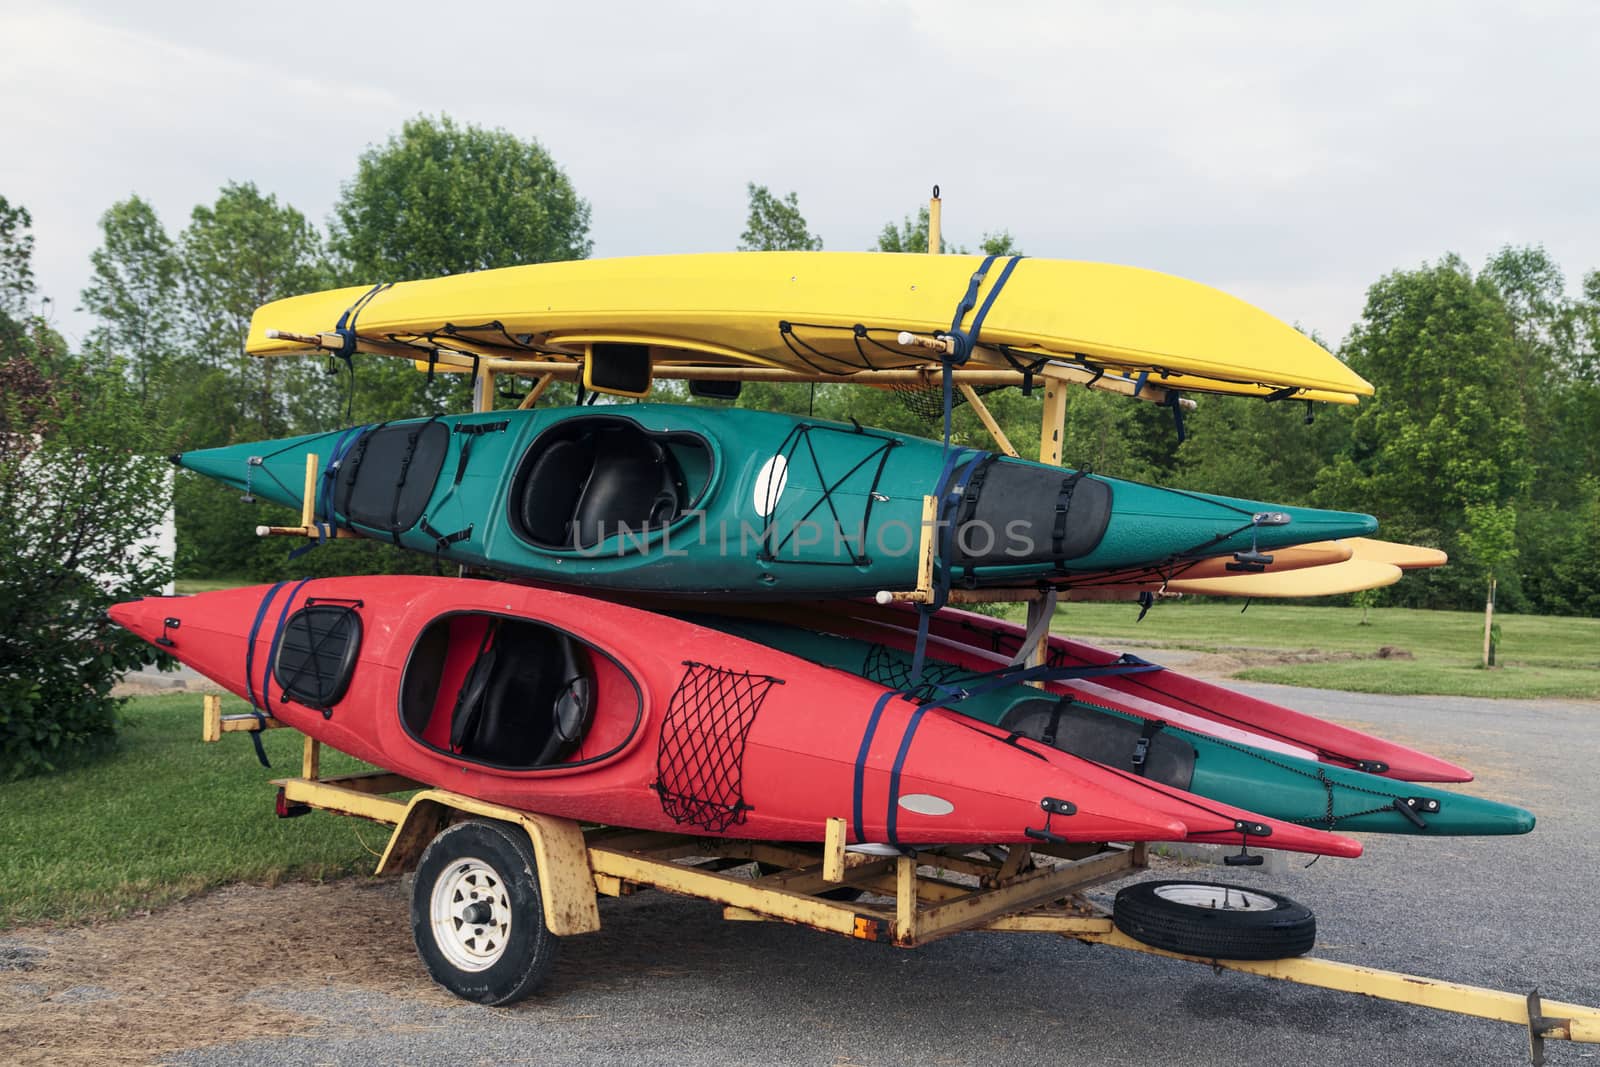 Kayaks and Trailer by fallesenphotography